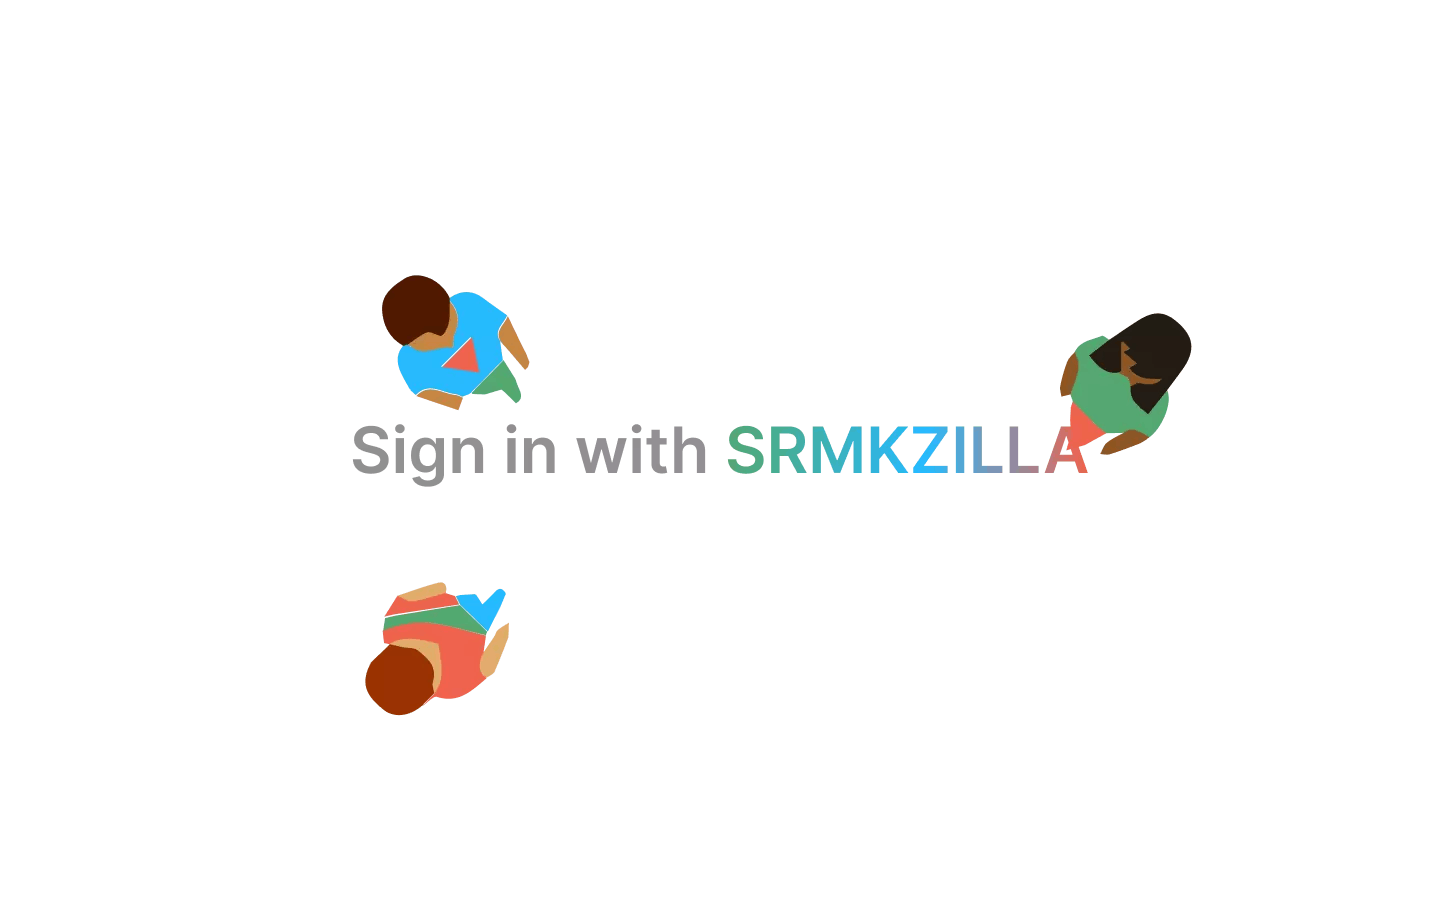 Sign in with SRMKZILLA